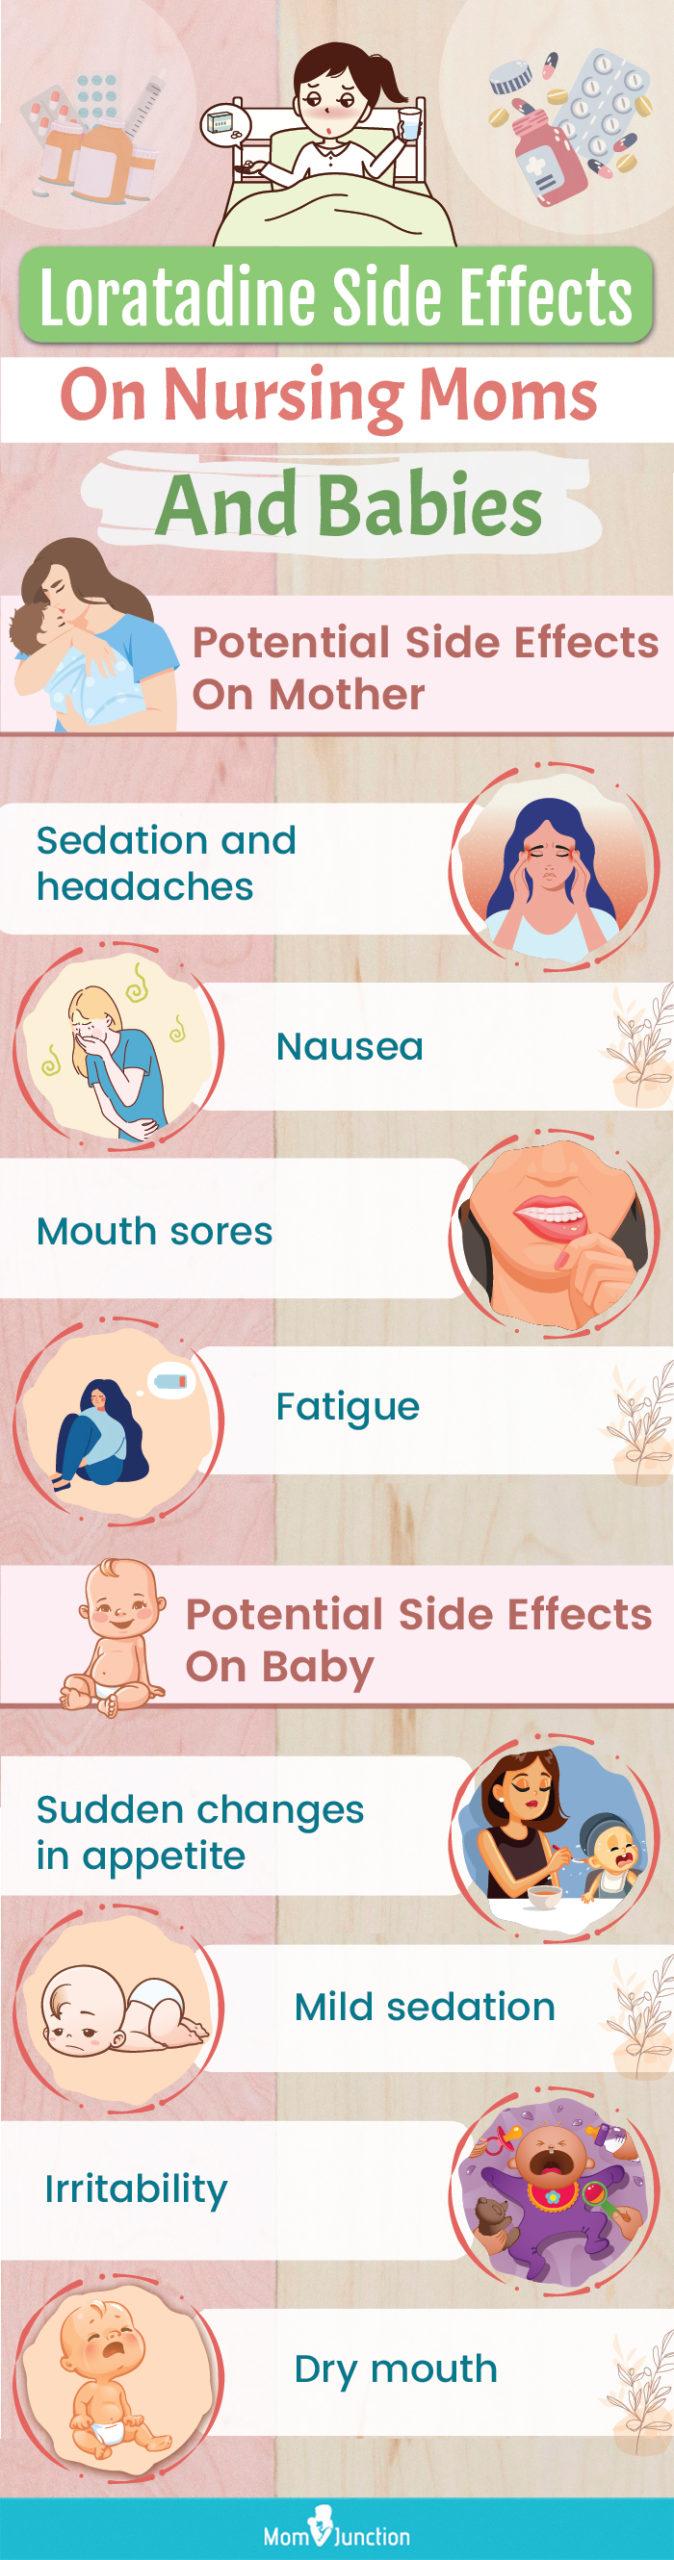 loratadine side effects on nursing moms and babies (infographic)